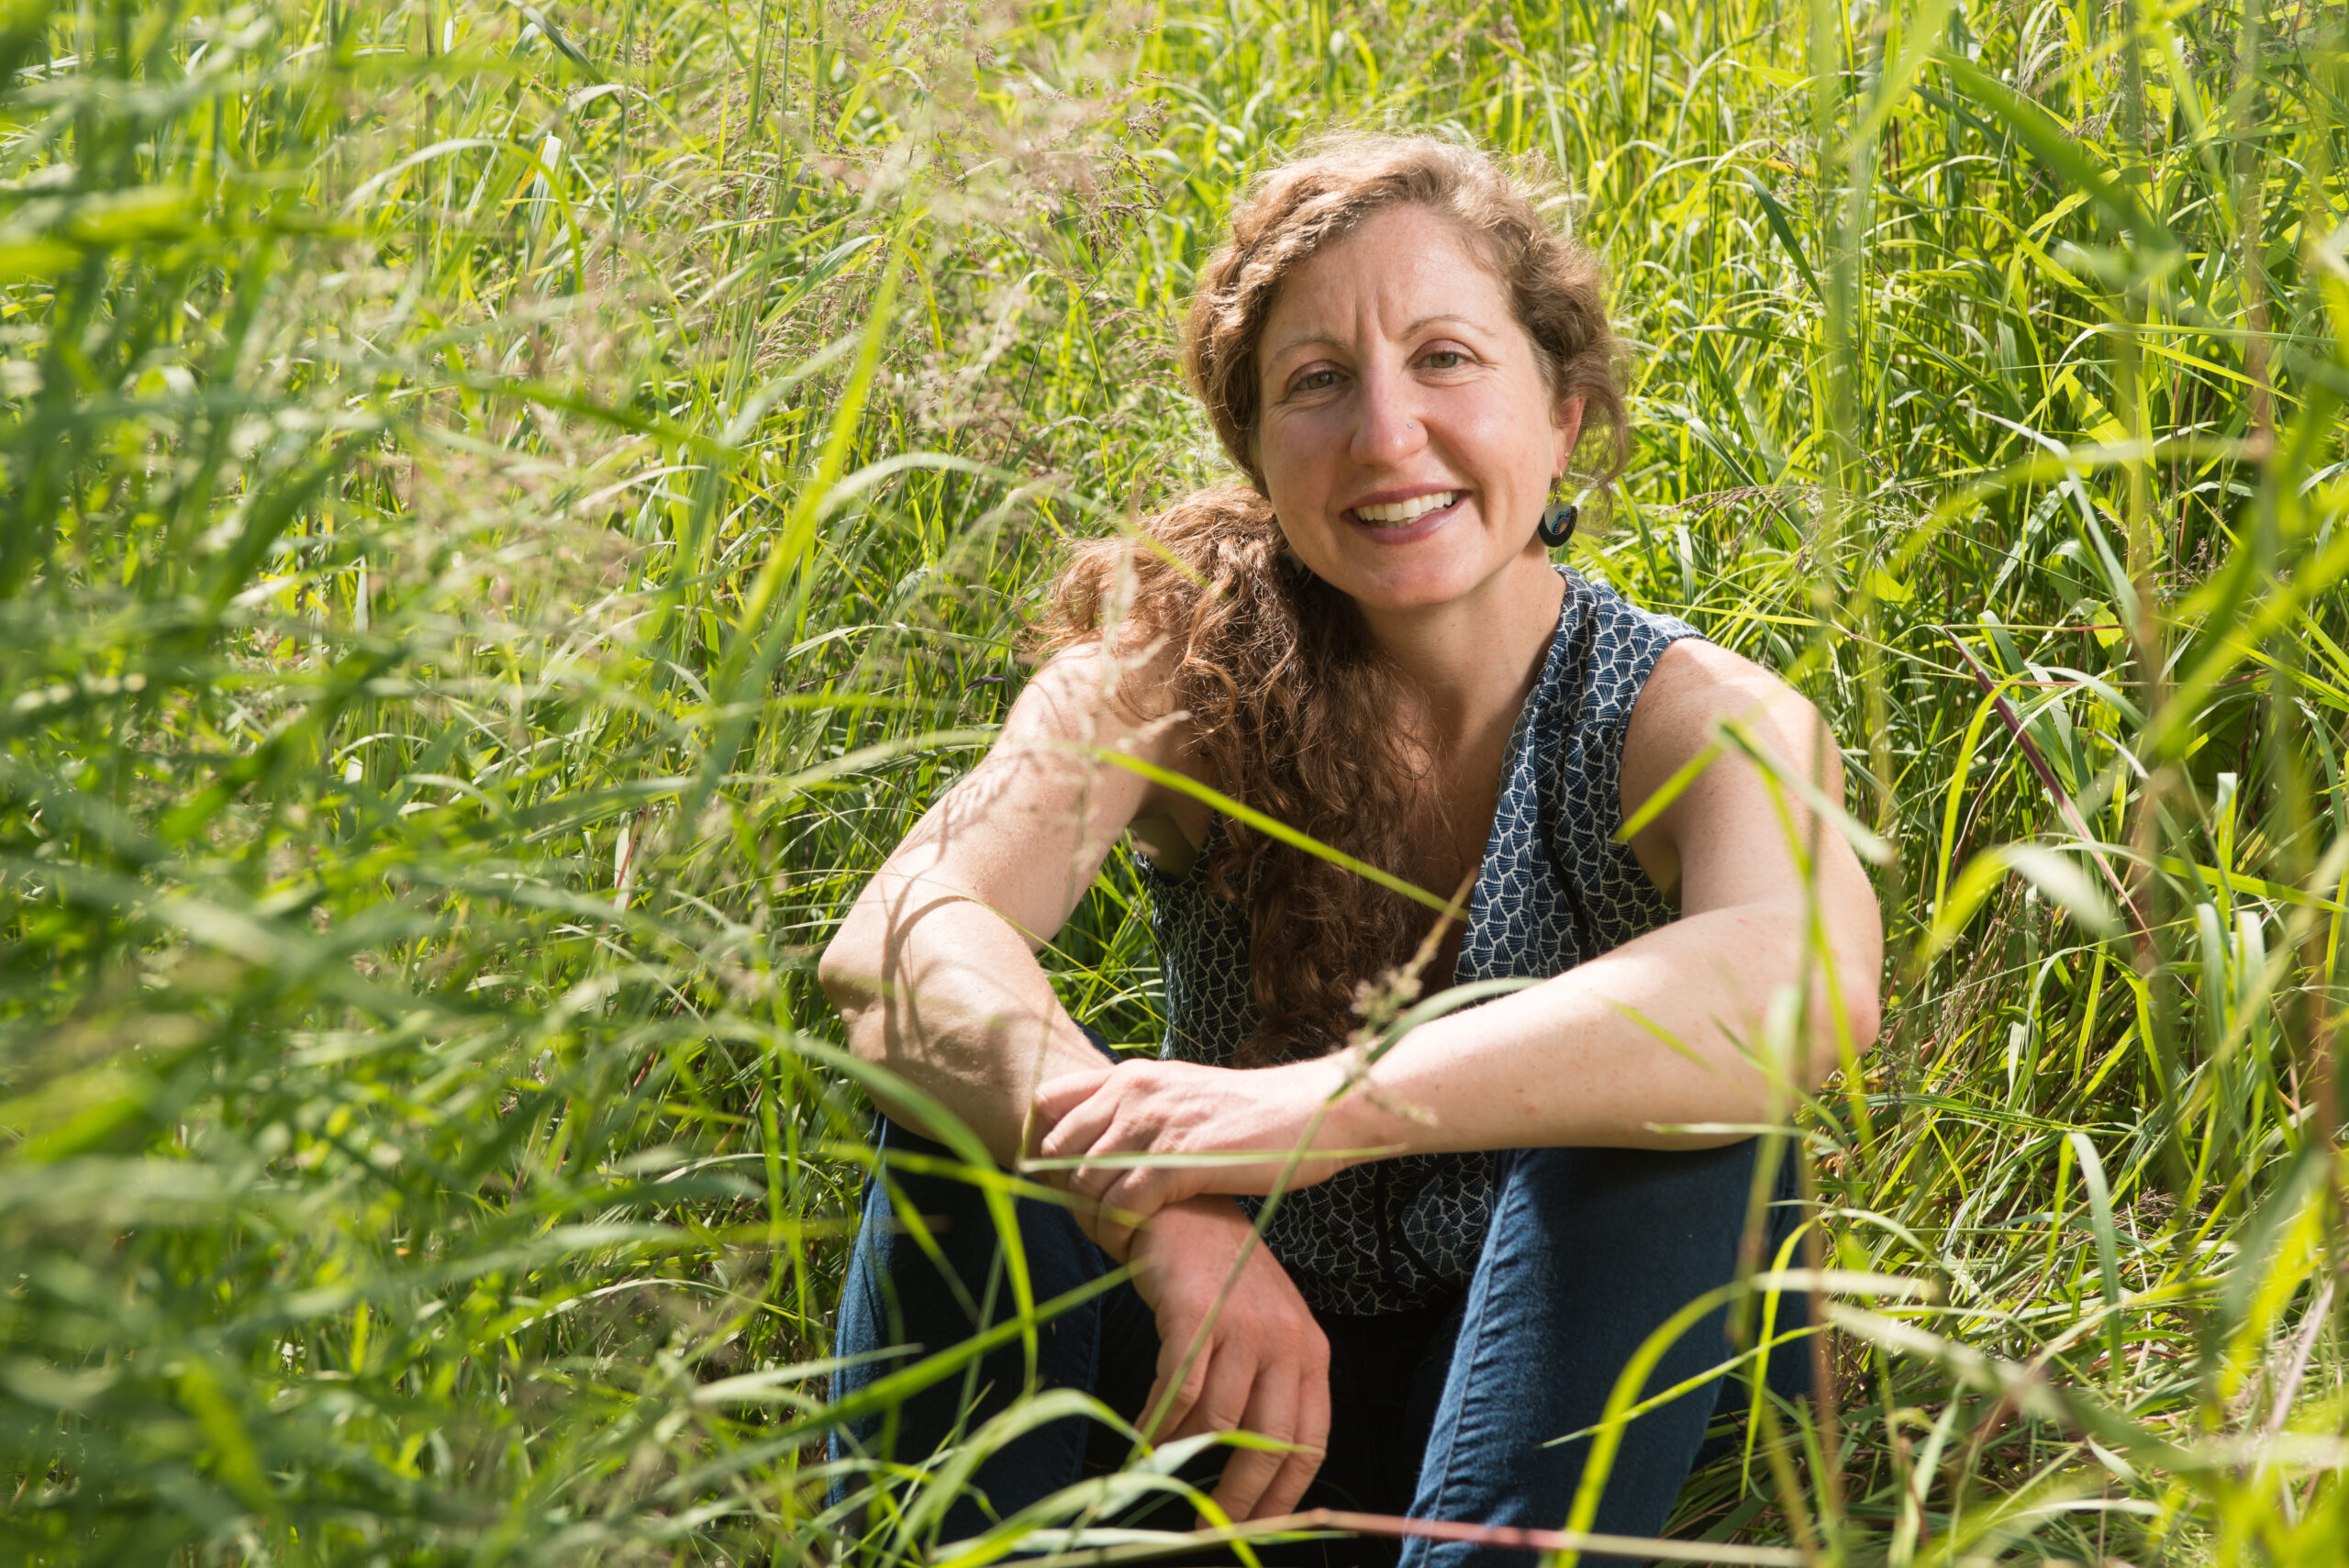 A woman sits in a field of grass